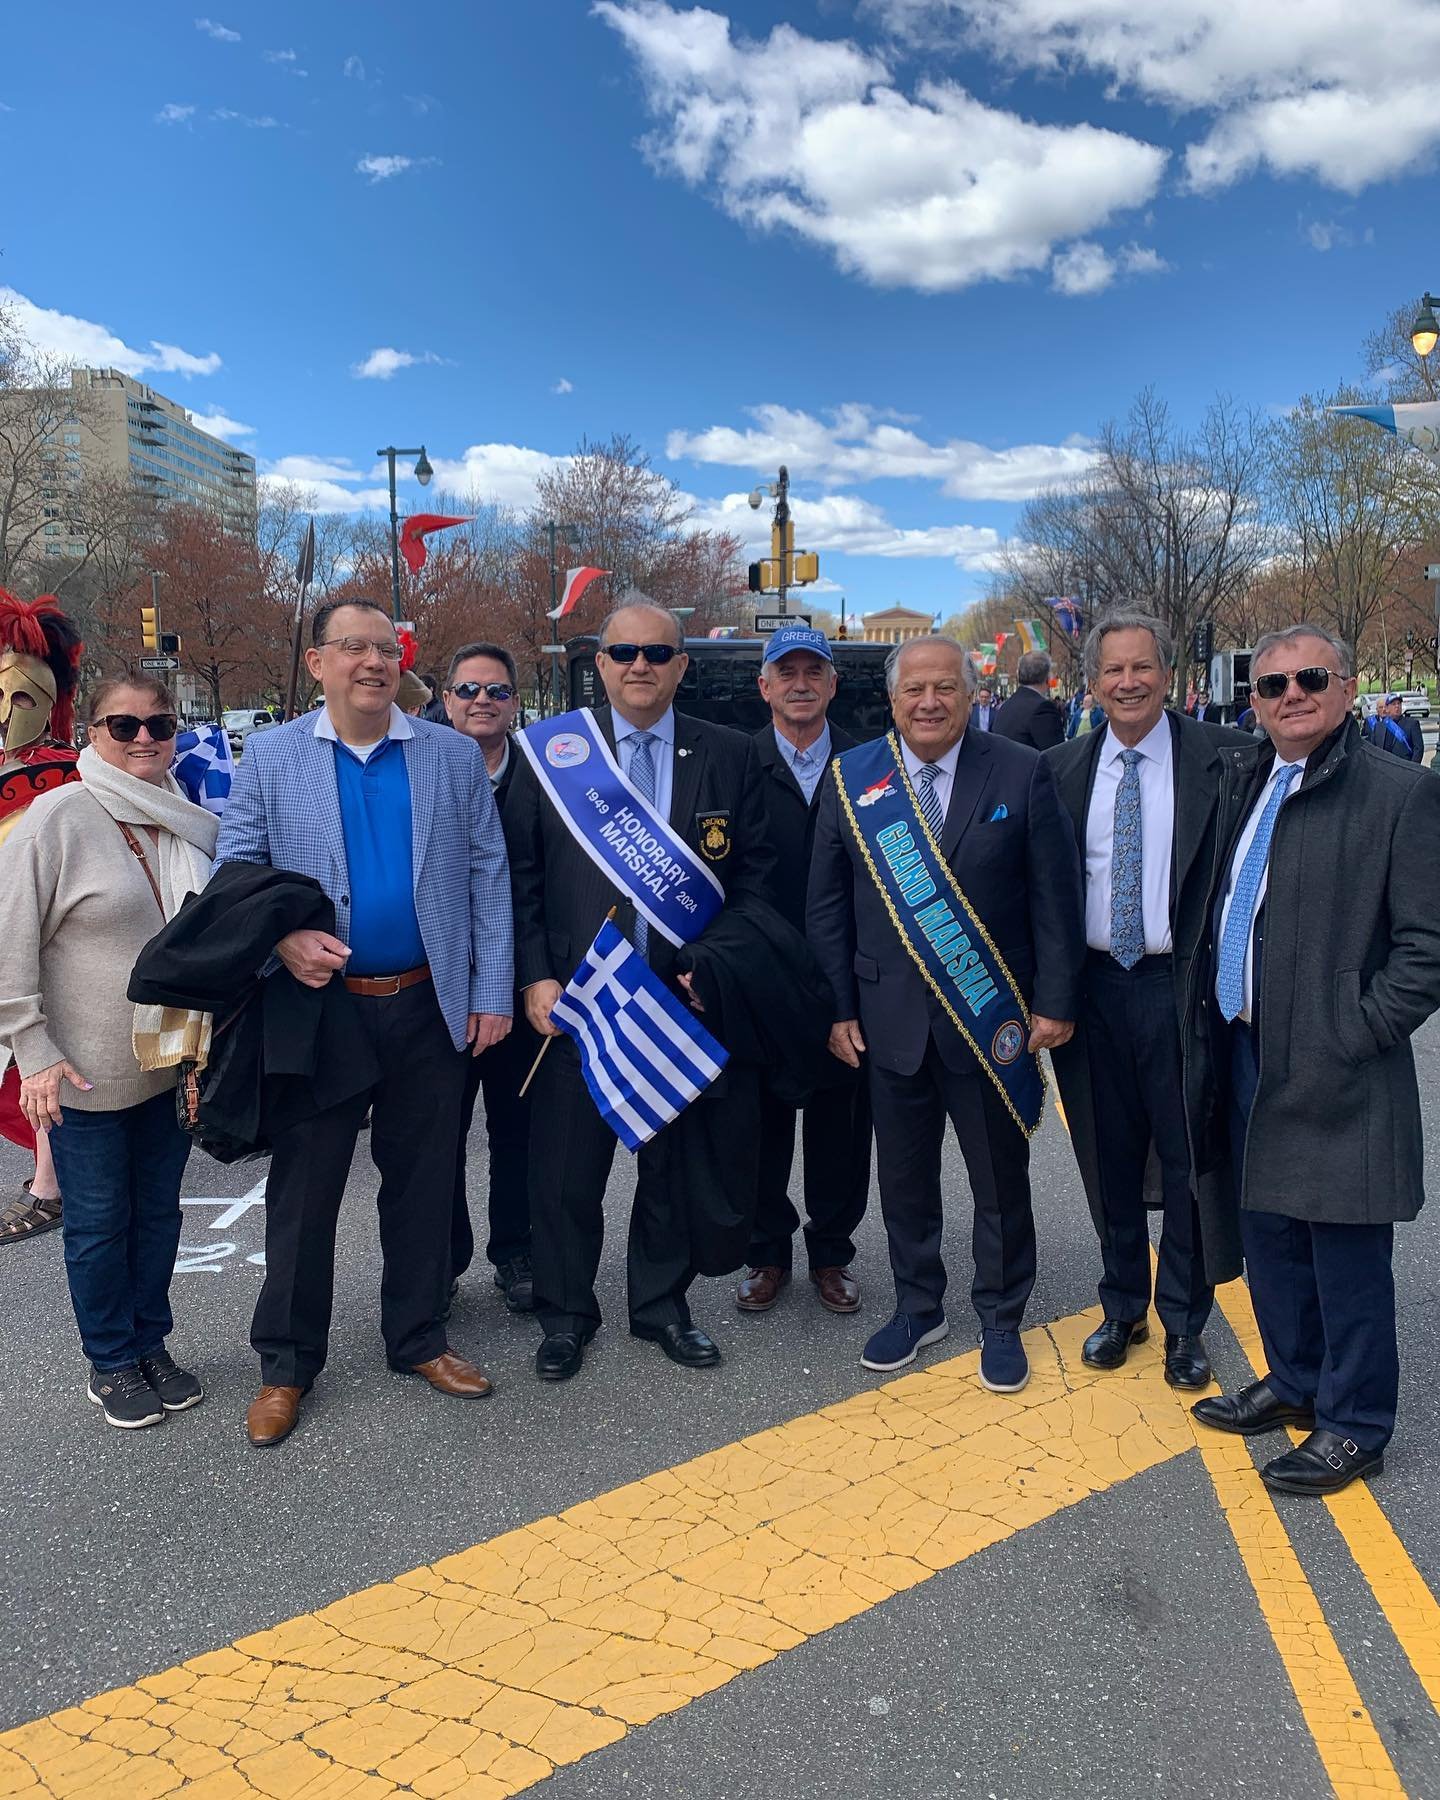  Grand Marshal Philip Christopher, AHI Board Members, and other parade attendees. 